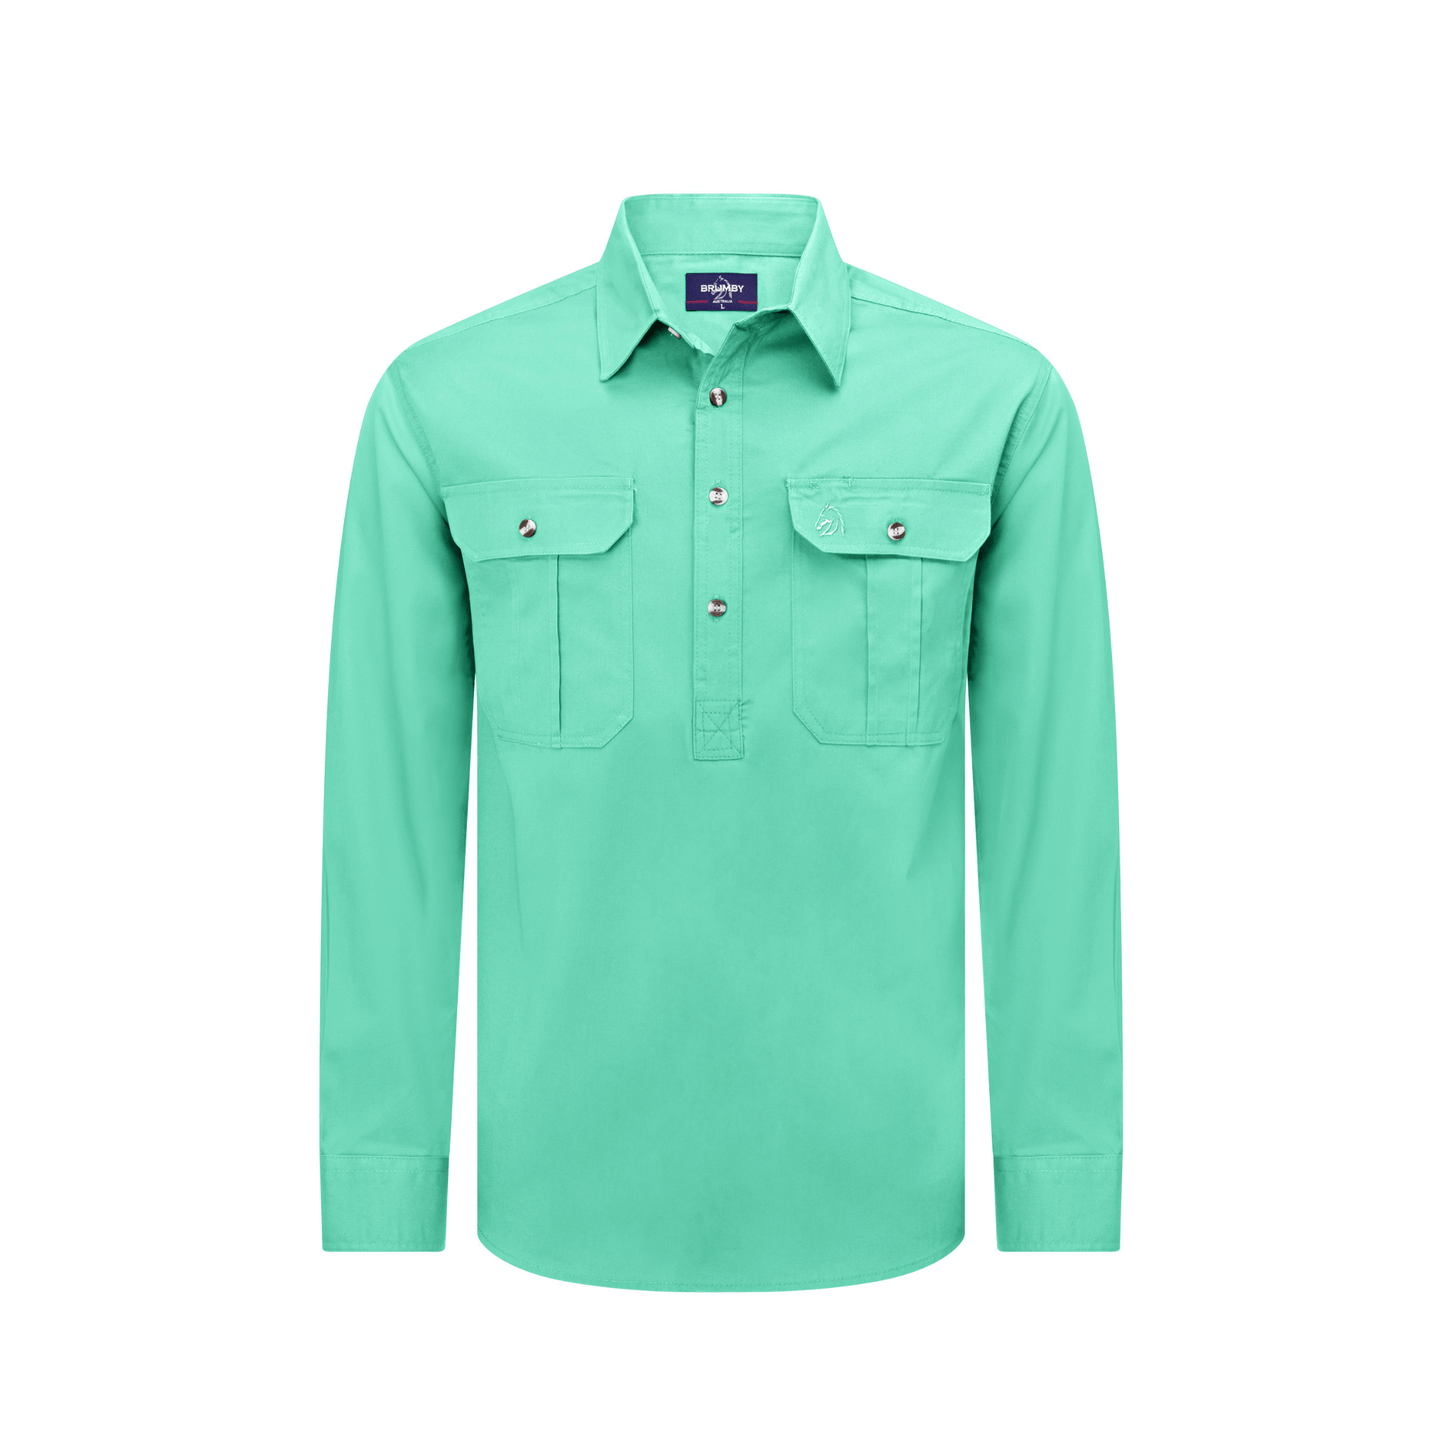 Brumby Half Button Shirt in Mint.